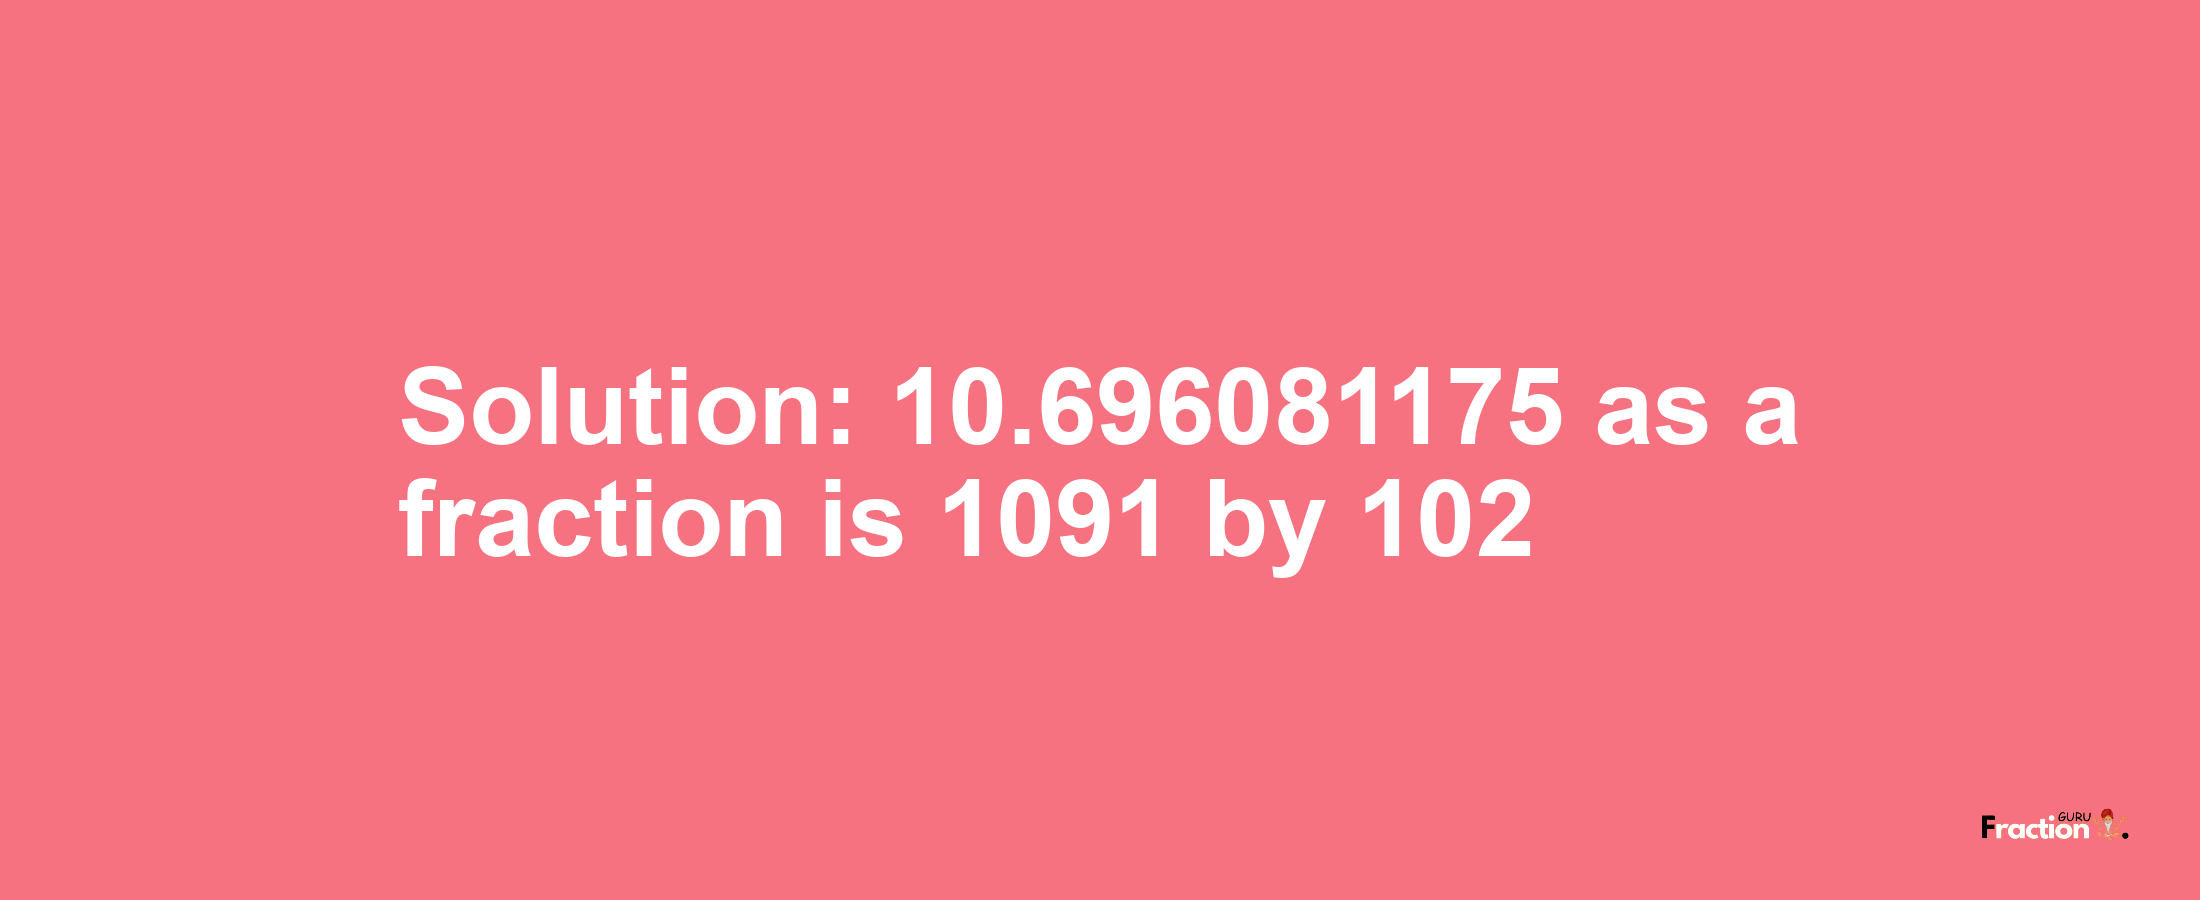 Solution:10.696081175 as a fraction is 1091/102